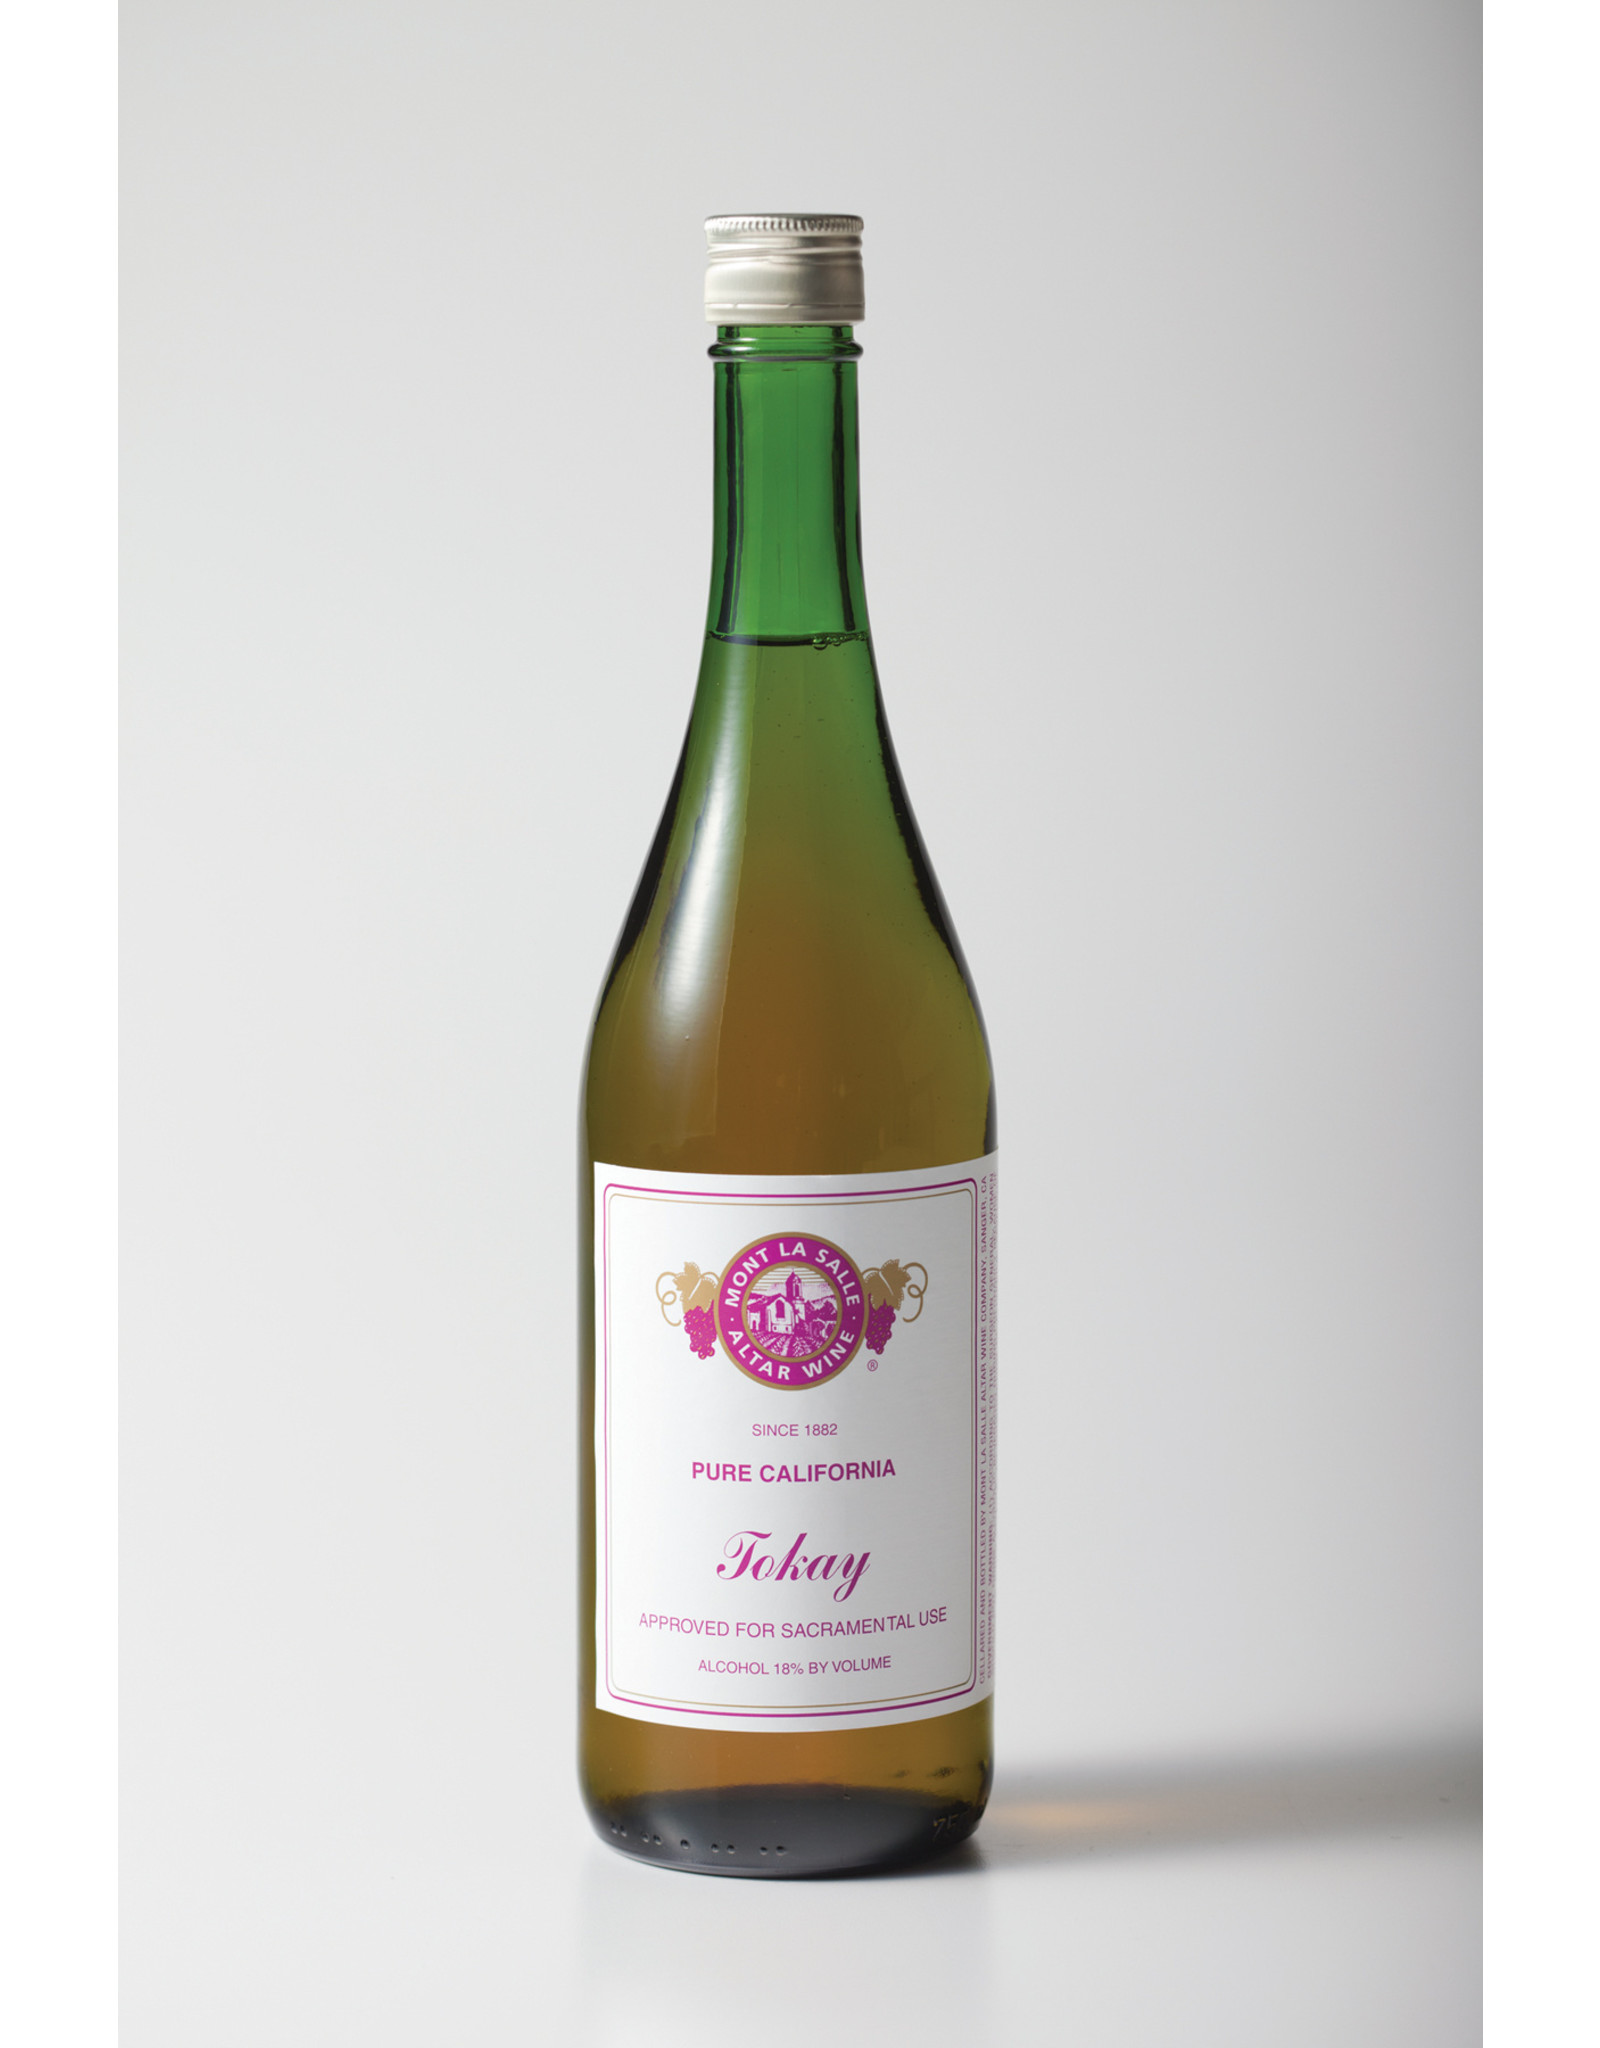 Mont La Salle Sale! $90 Tokay Bottles CANNOT BE SOLD ONLINE, CALL TO ORDER Tokay (12 750-ml Bottles) Wine